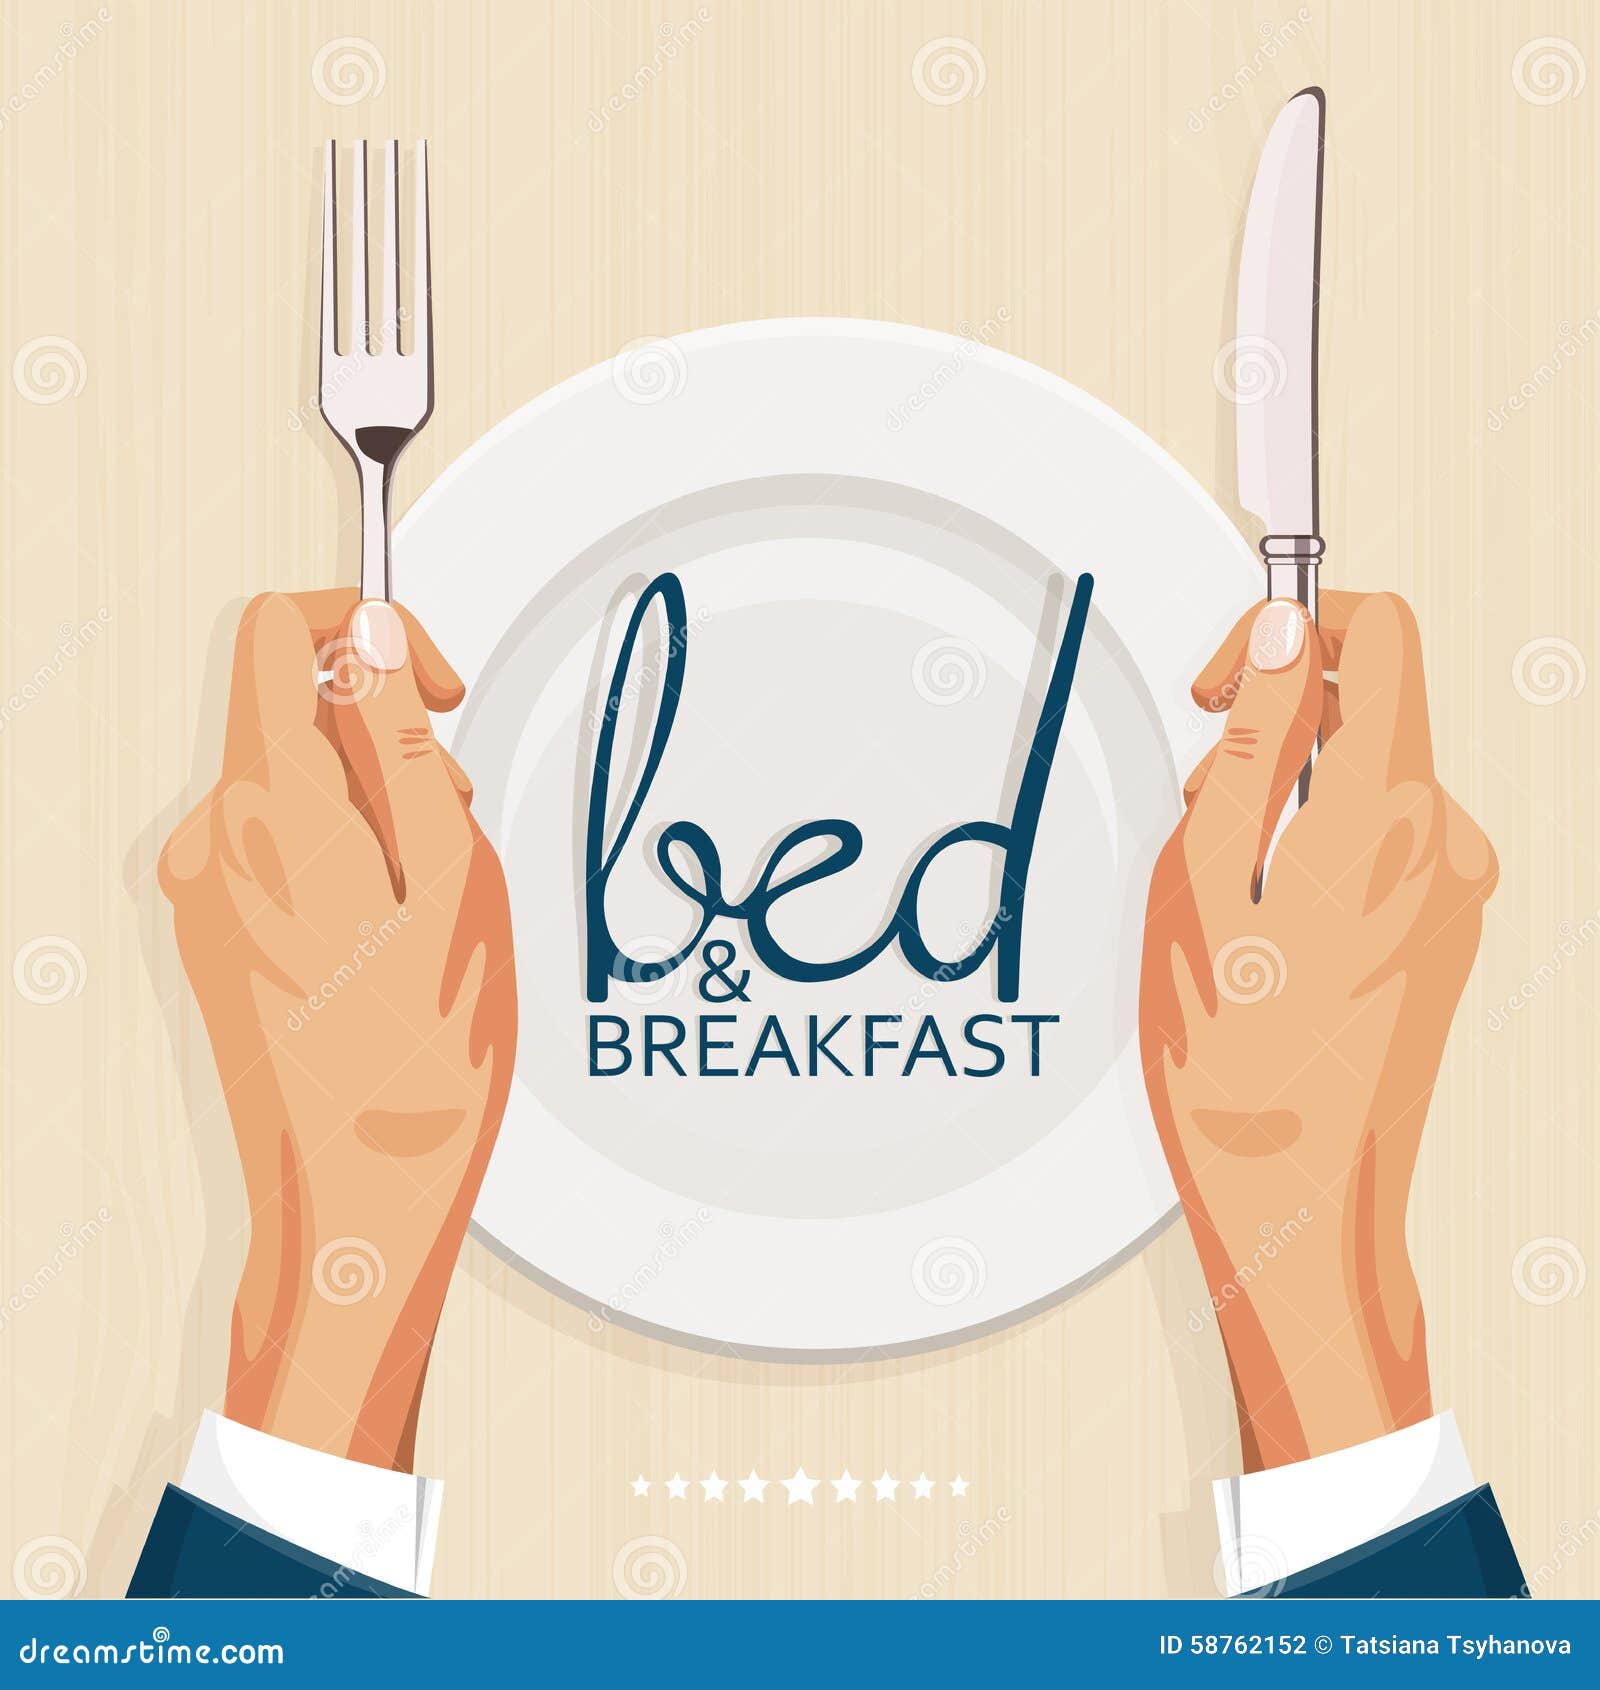 How to Write a Business Plan for a Bed & Breakfast